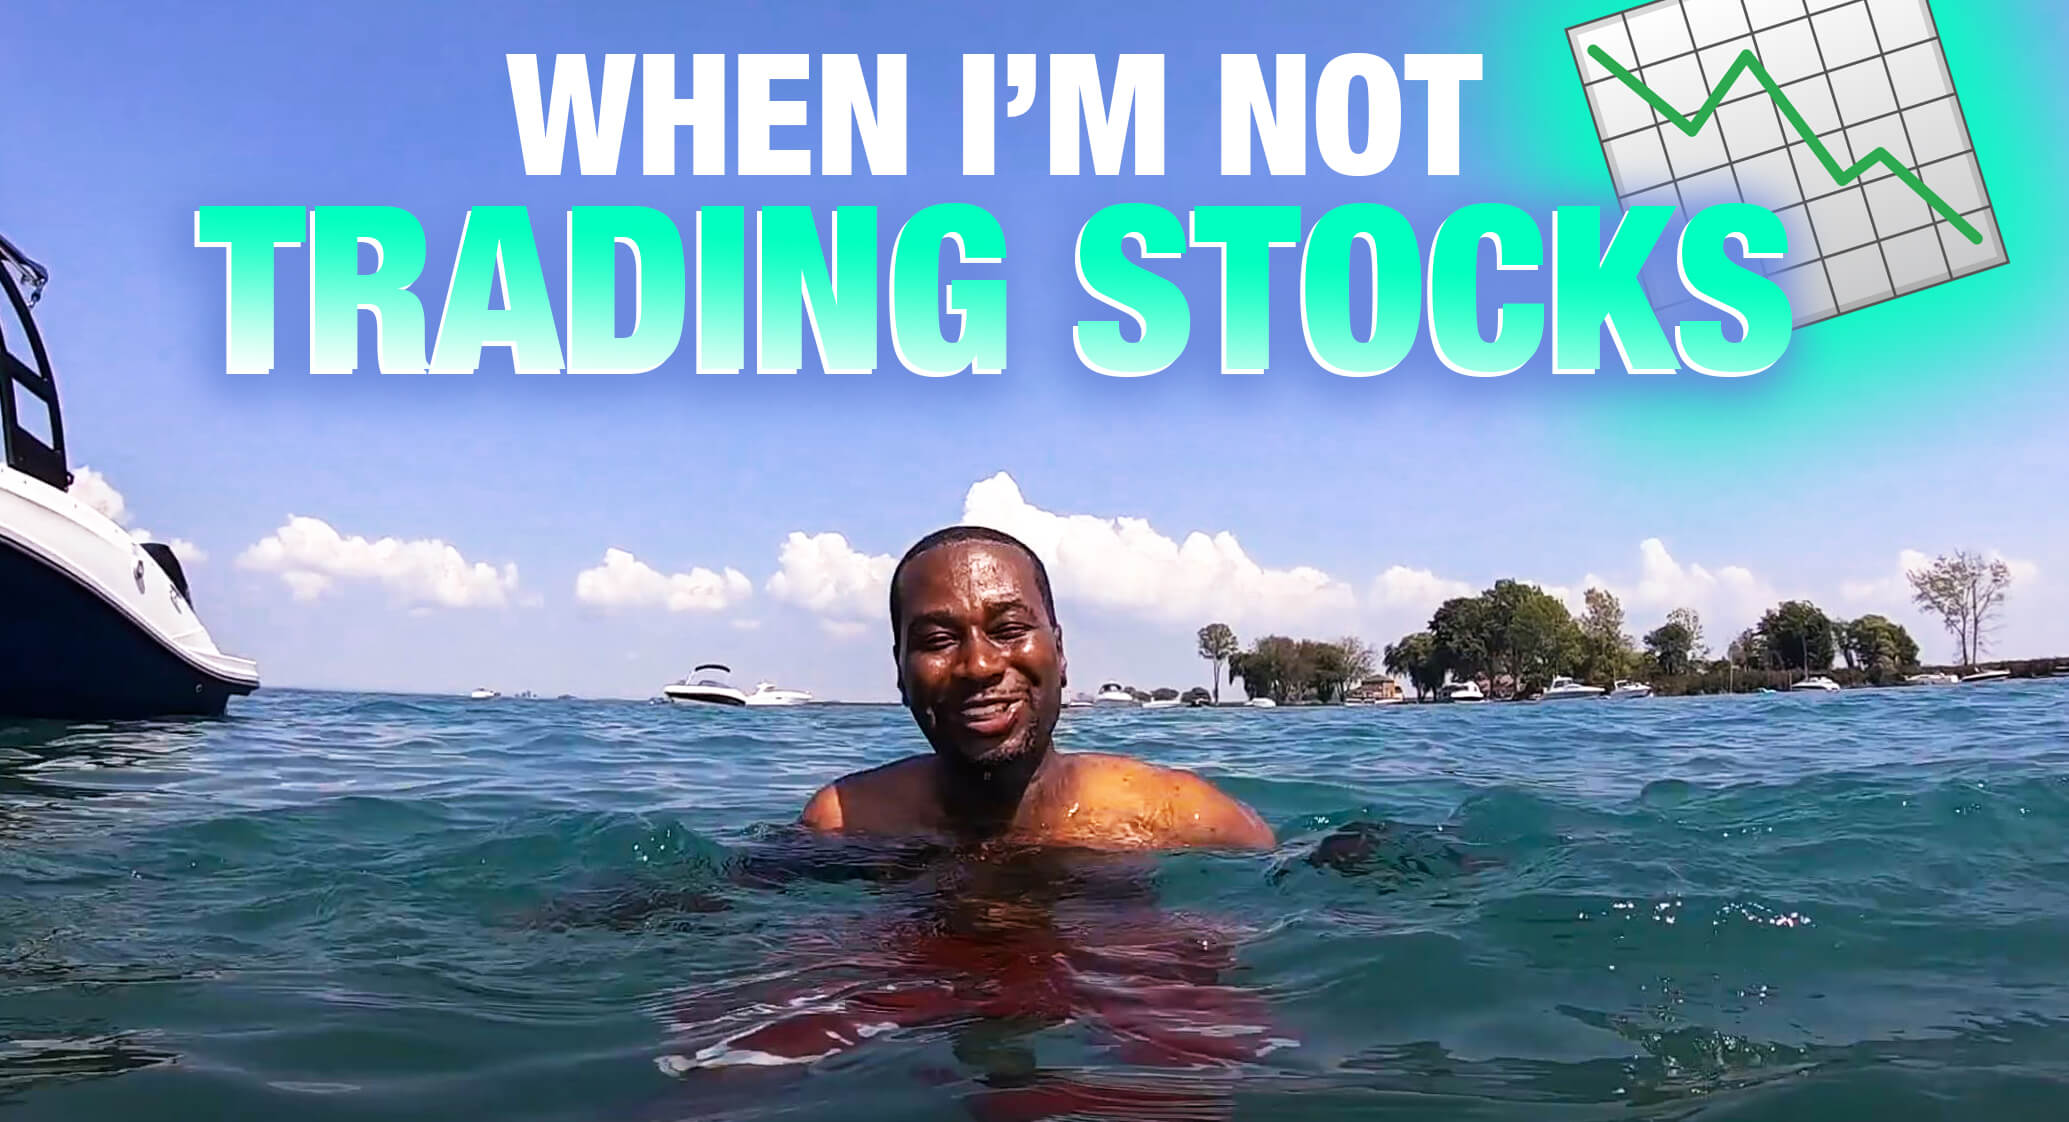 Vlog: A Normal Day in the Life of a Stock Trader